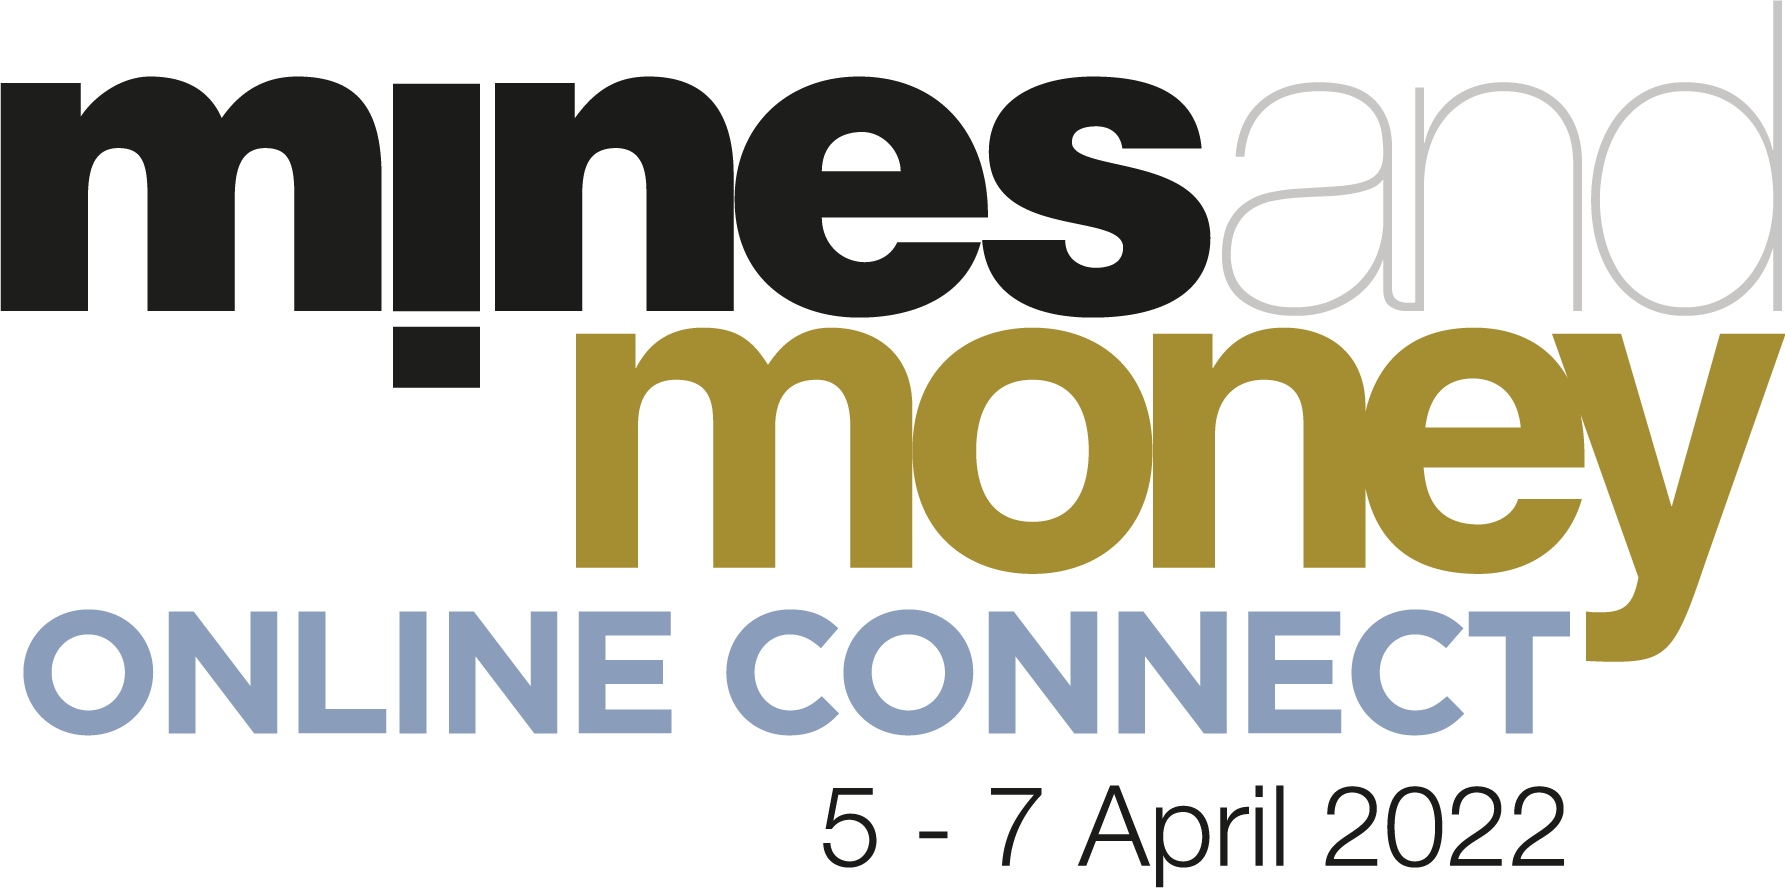 Mines and Money Online Connect - April 2022 organized by Mines and Money